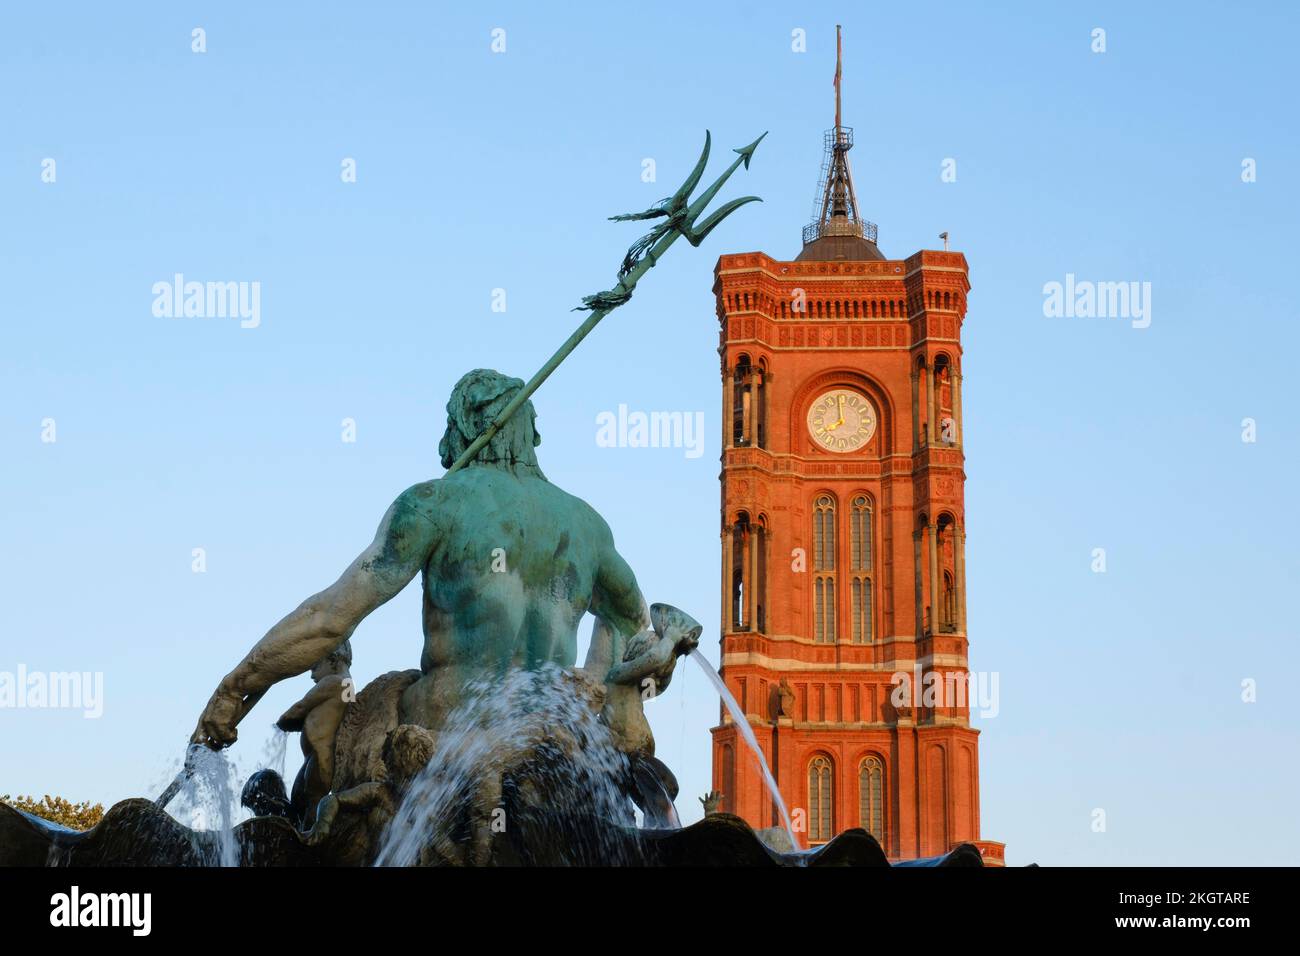 Germany, Berlin, Clock tower of Berlin Town Hall with Neptunbrunnen in foreground Stock Photo